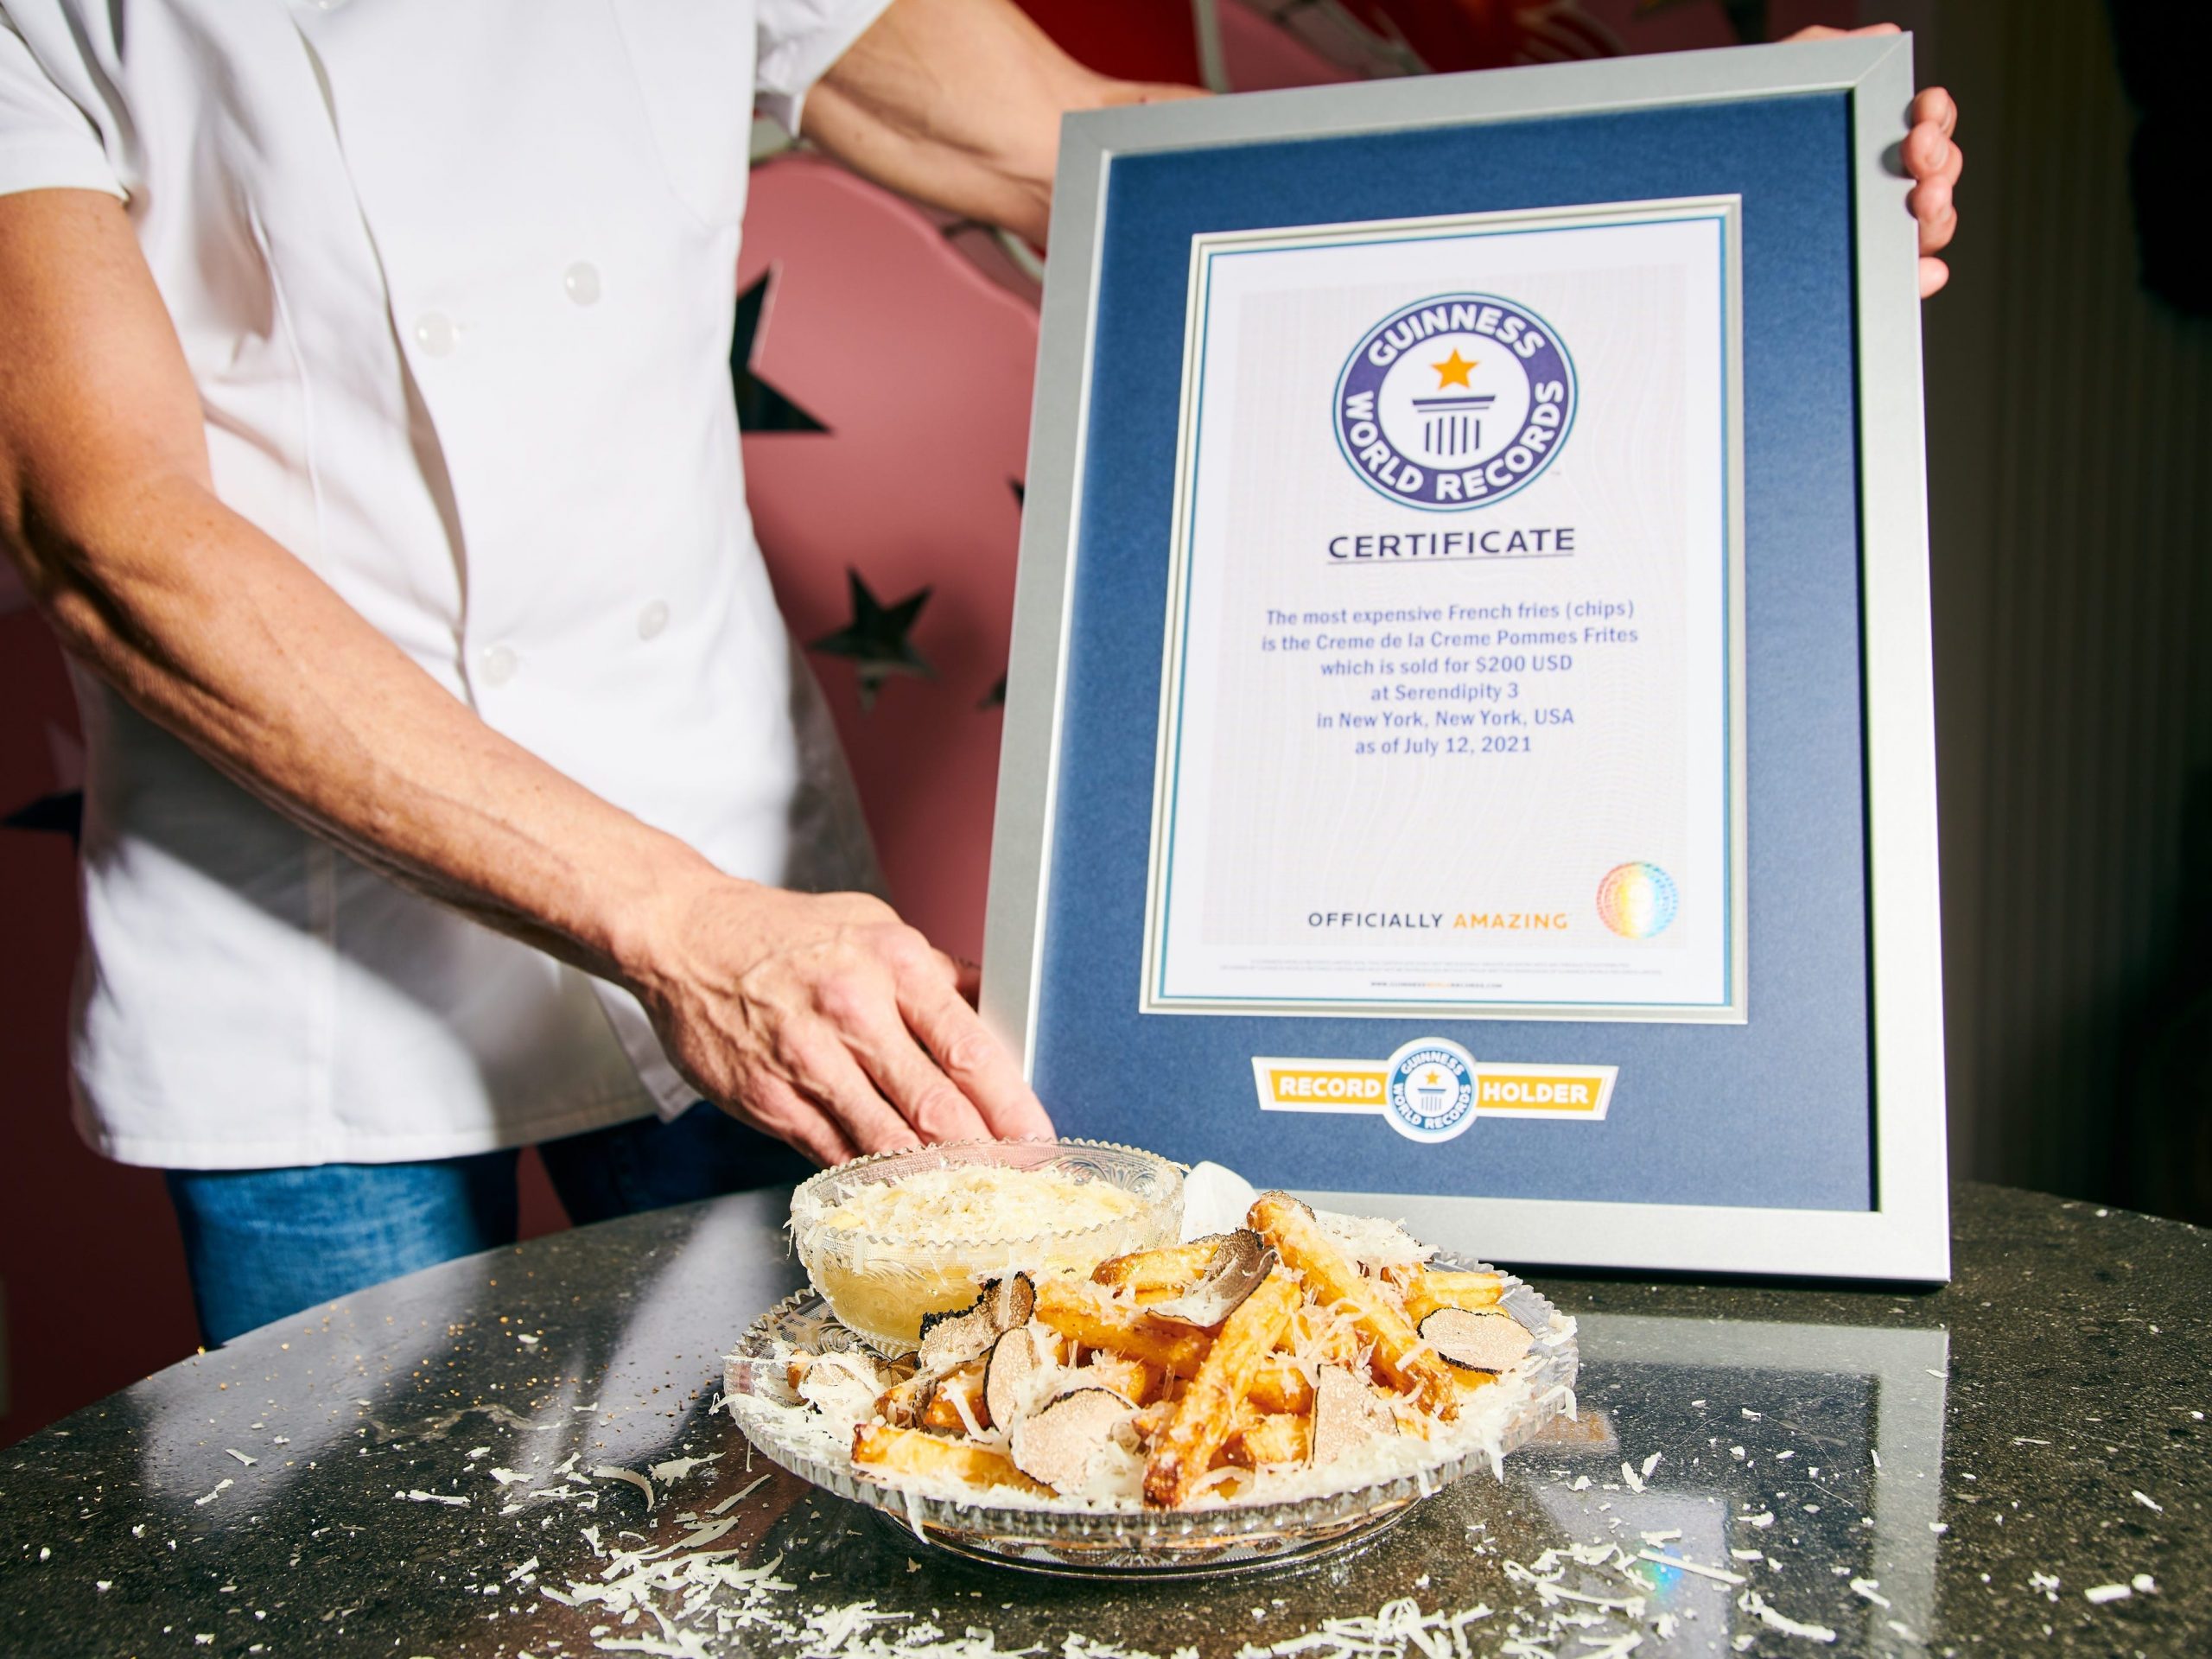 Serendipity3 holds the Guinness World Record for the most expensive French fries